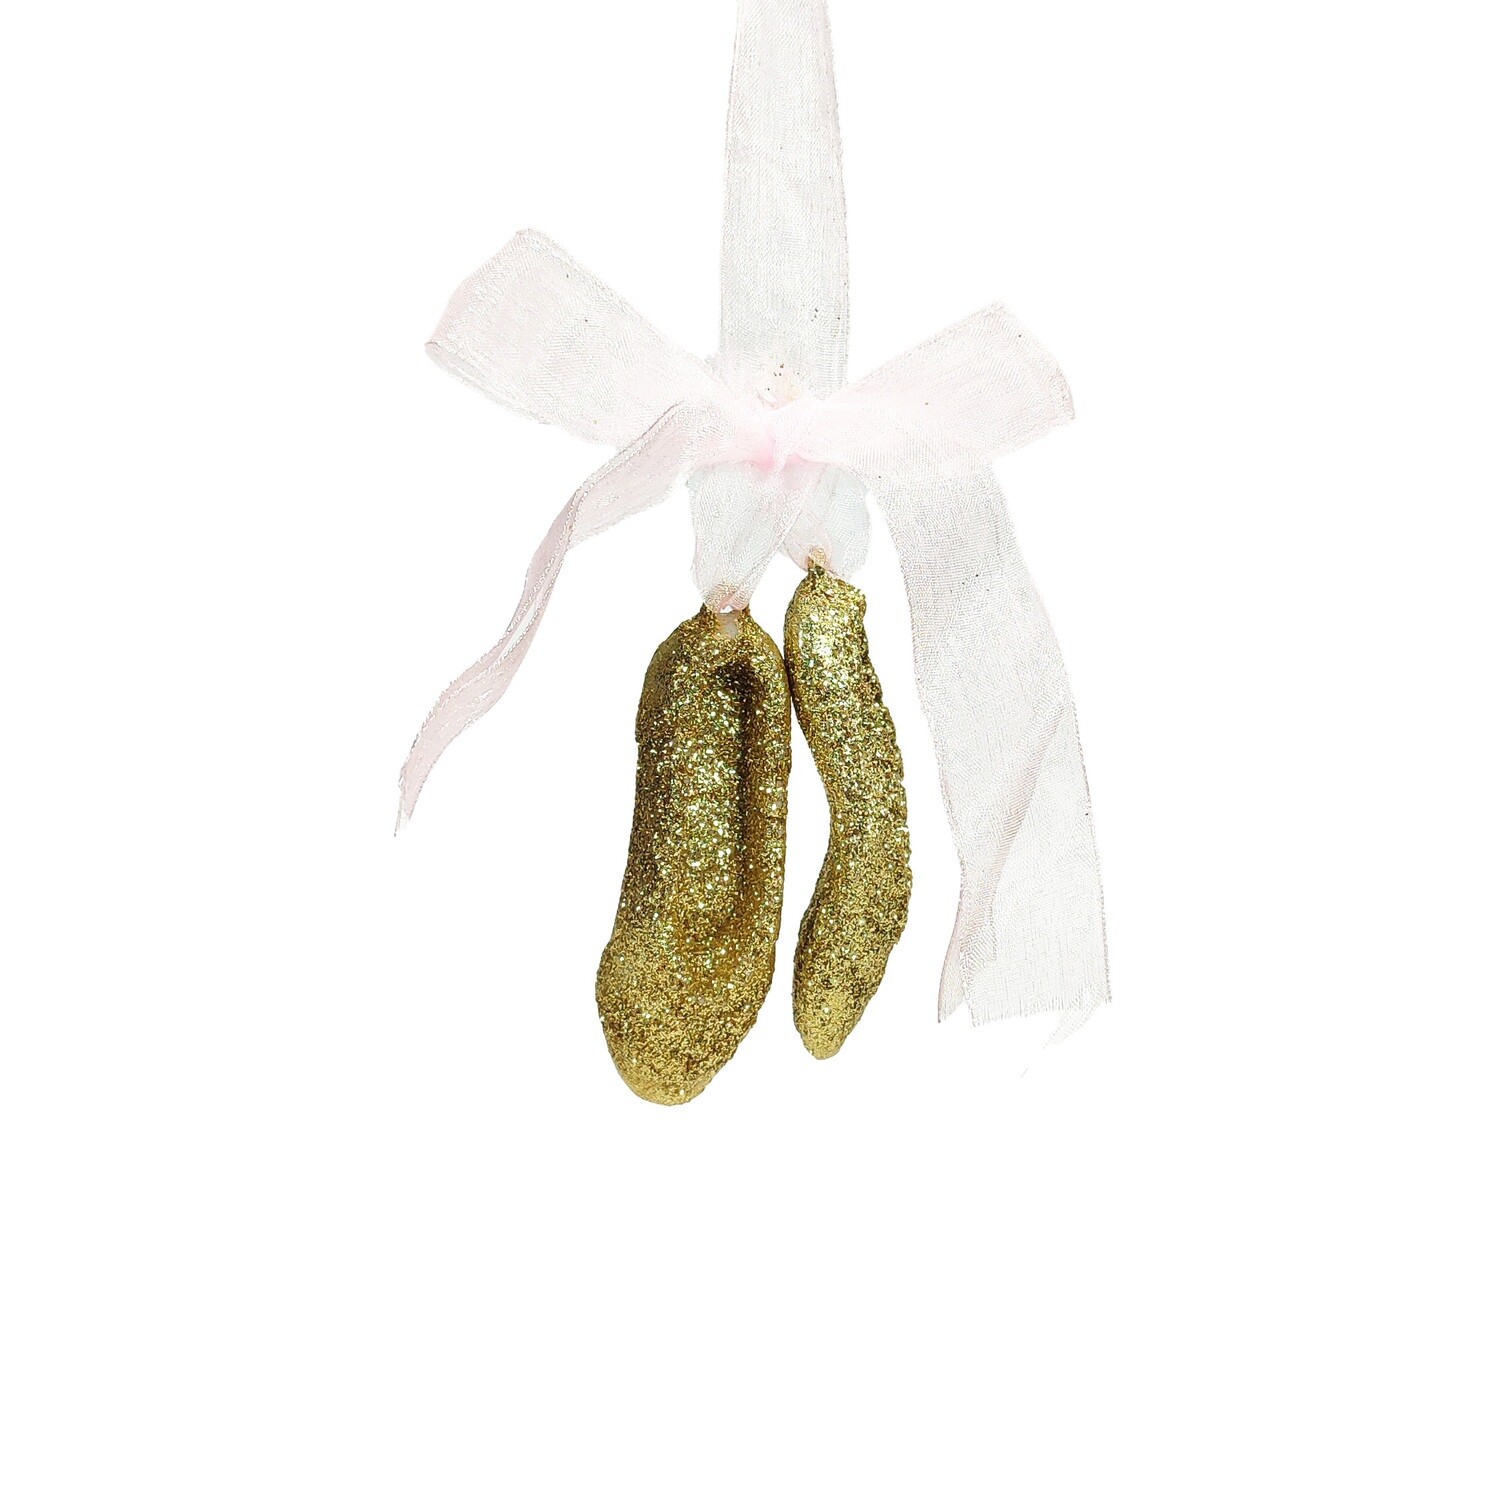 Ballet Shoes With Gold Glitter Hanging Ornament 2.5x2.7x8cm